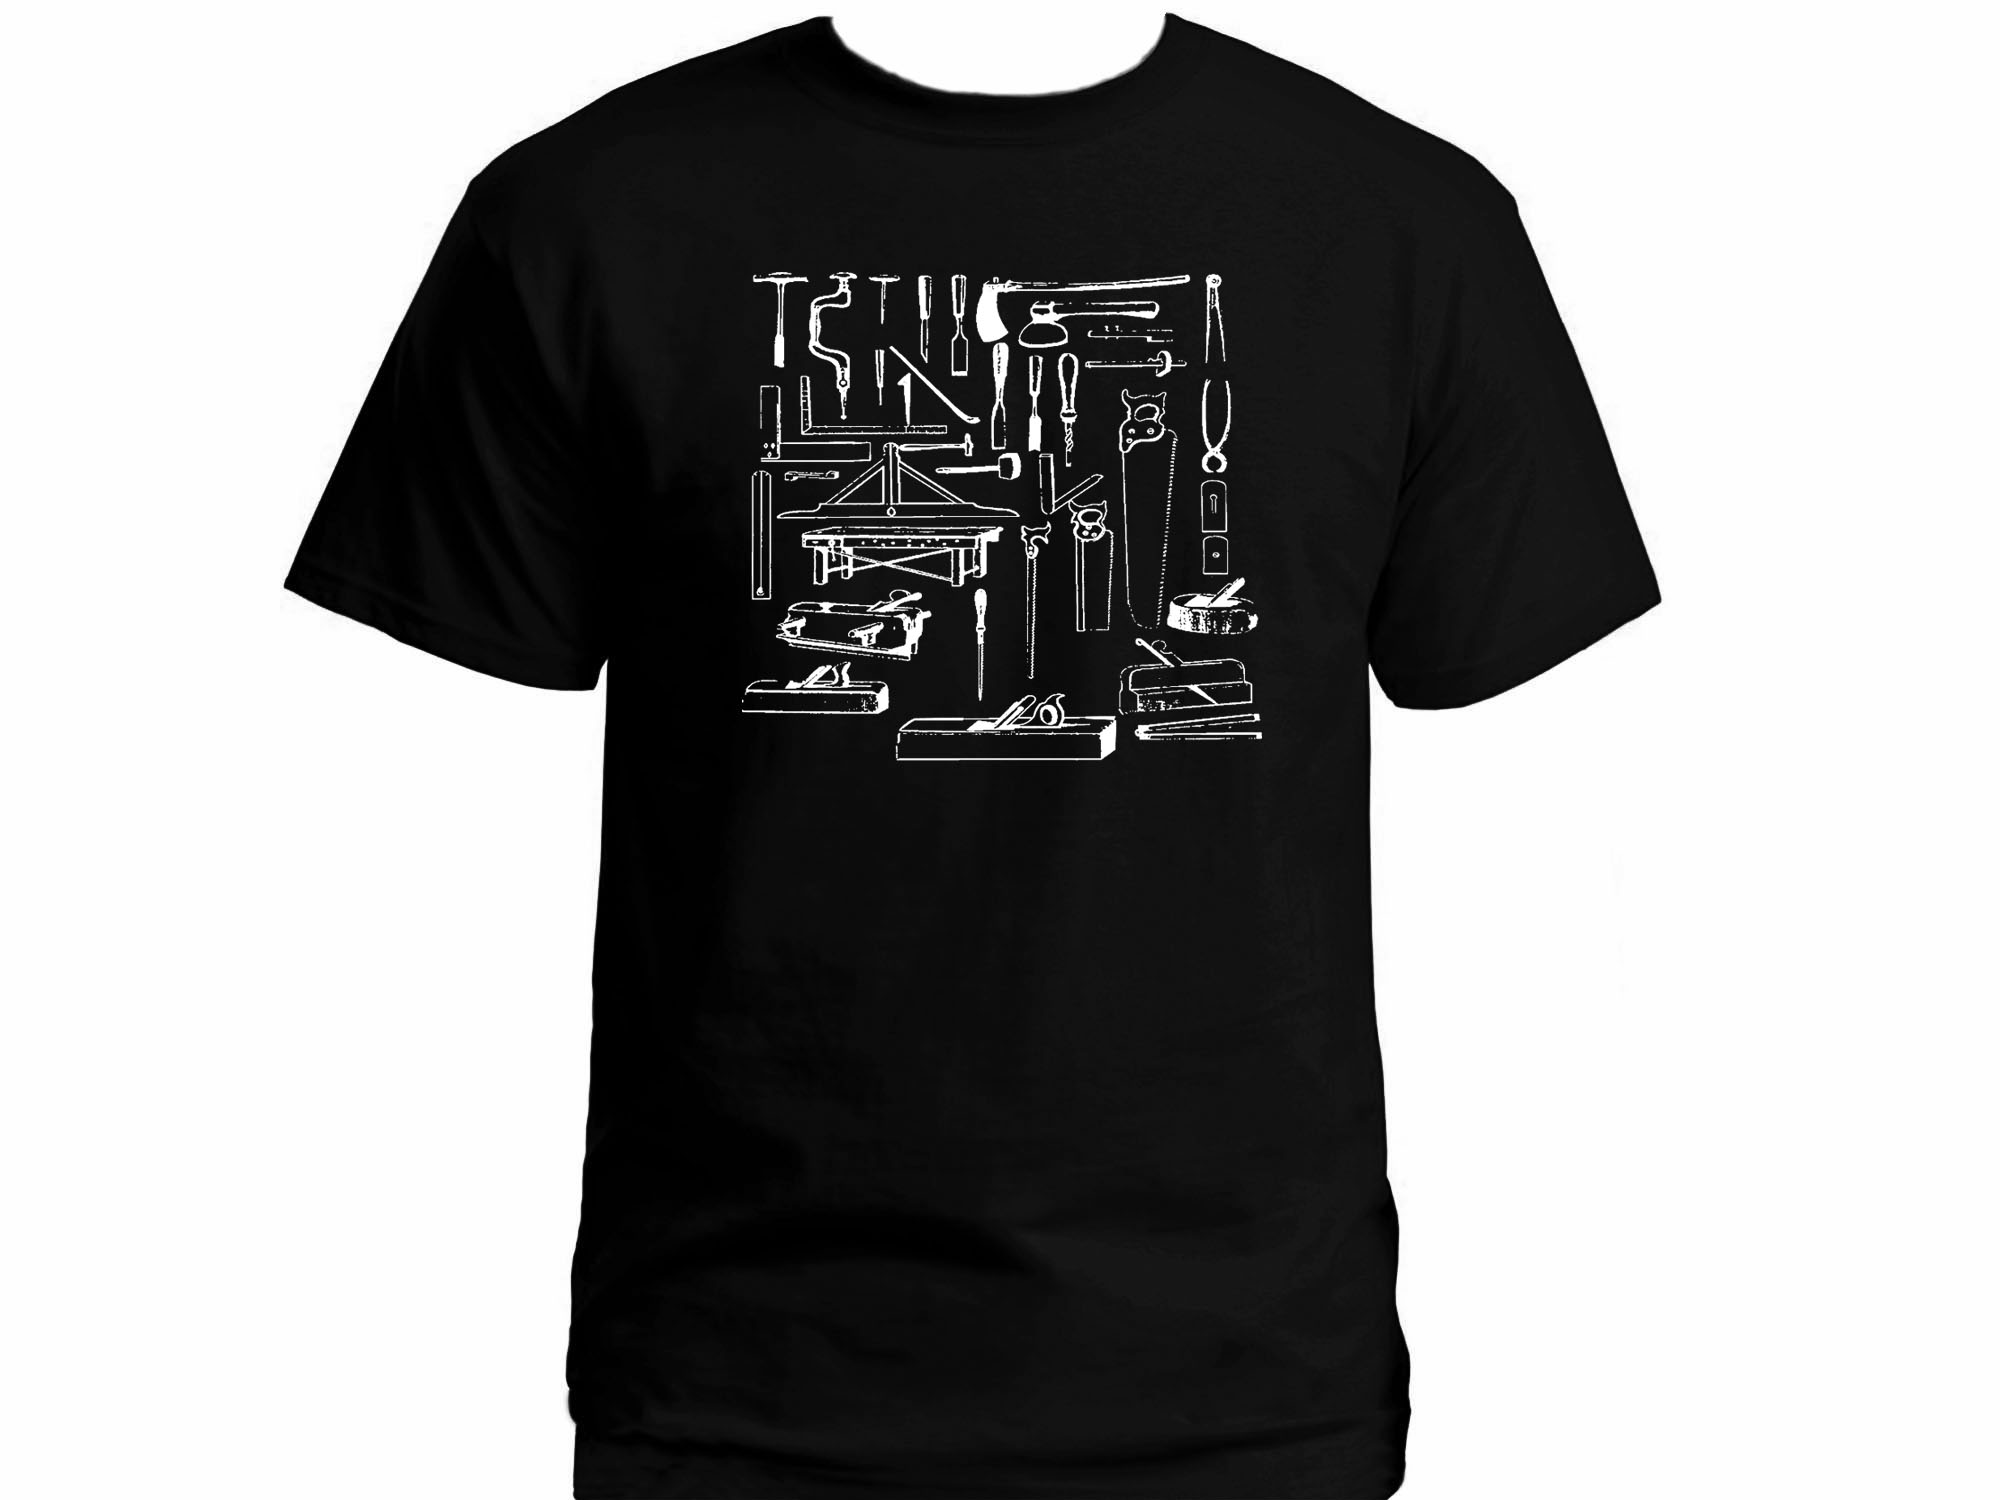 Woodworking wood worker tools carpentry black t-shirt great gift for him